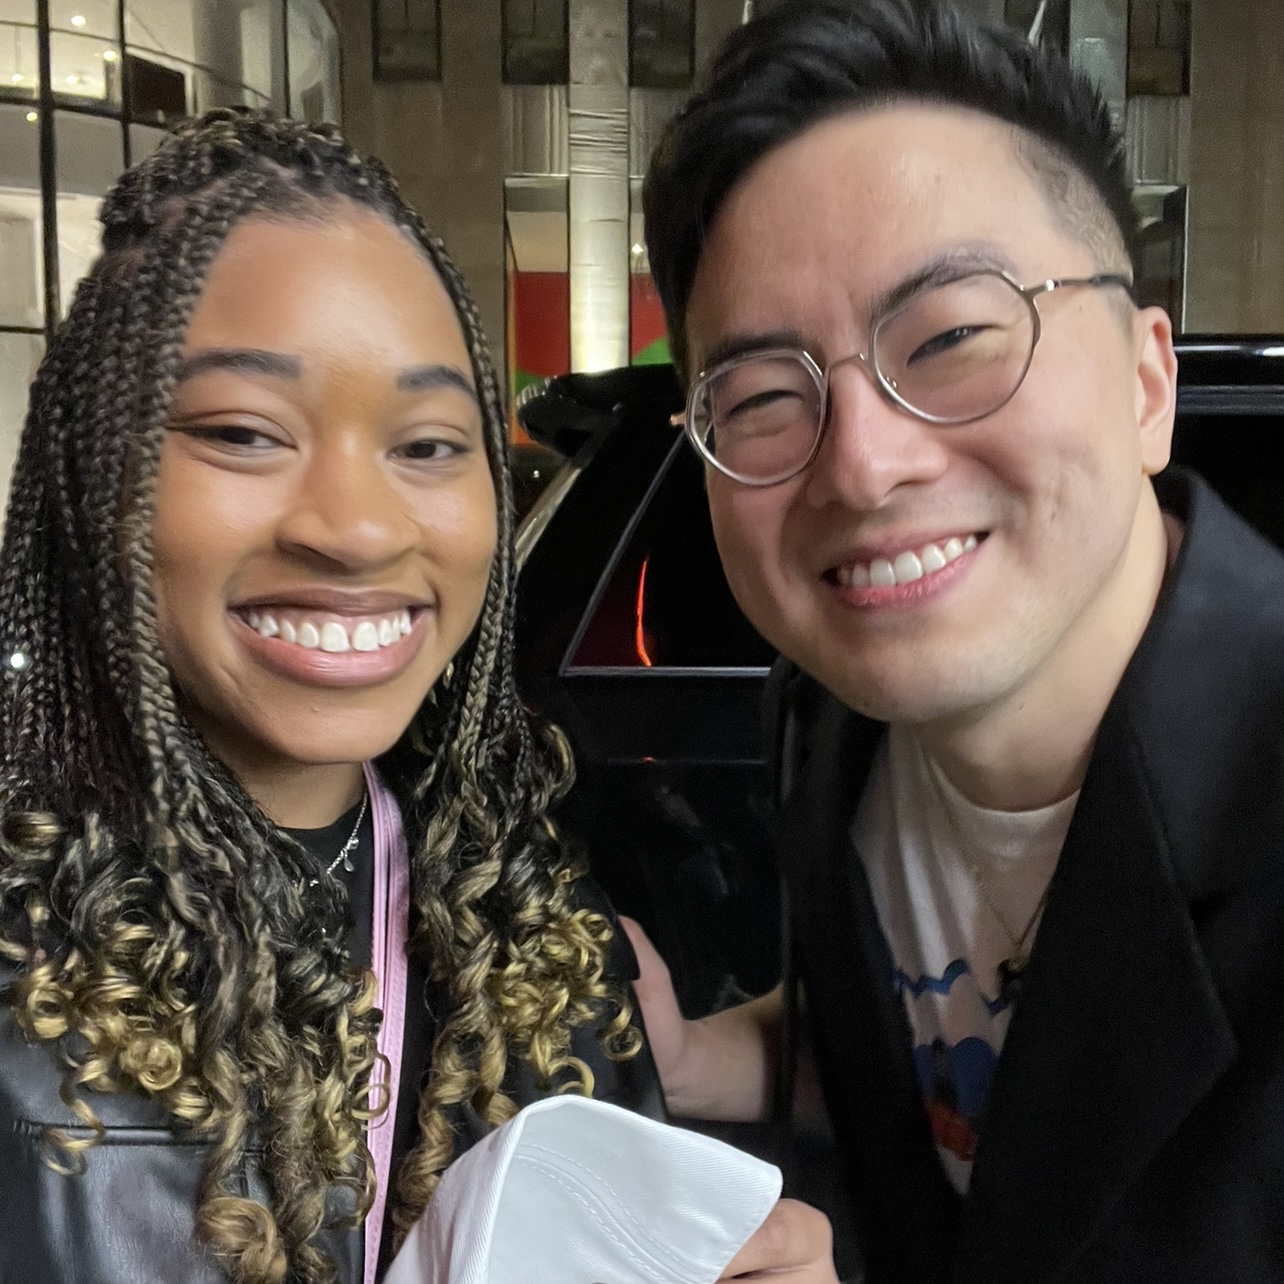 Author poses with Bown Yang, a cast member of “Saturday Night Live” and an NYU alum.